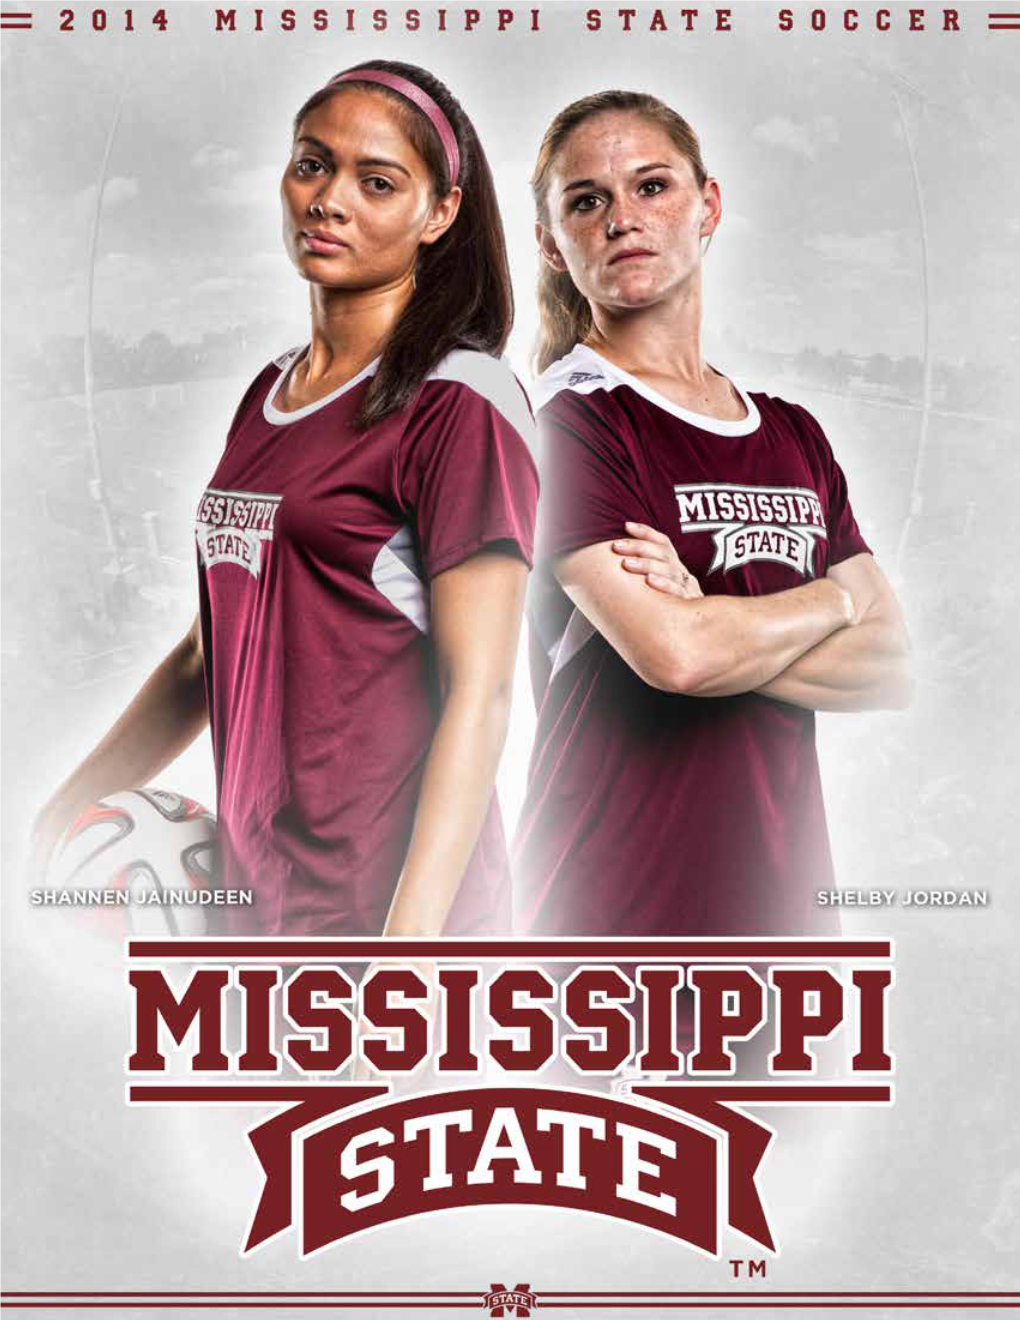 2014 Mississippi State Soccer Schedule